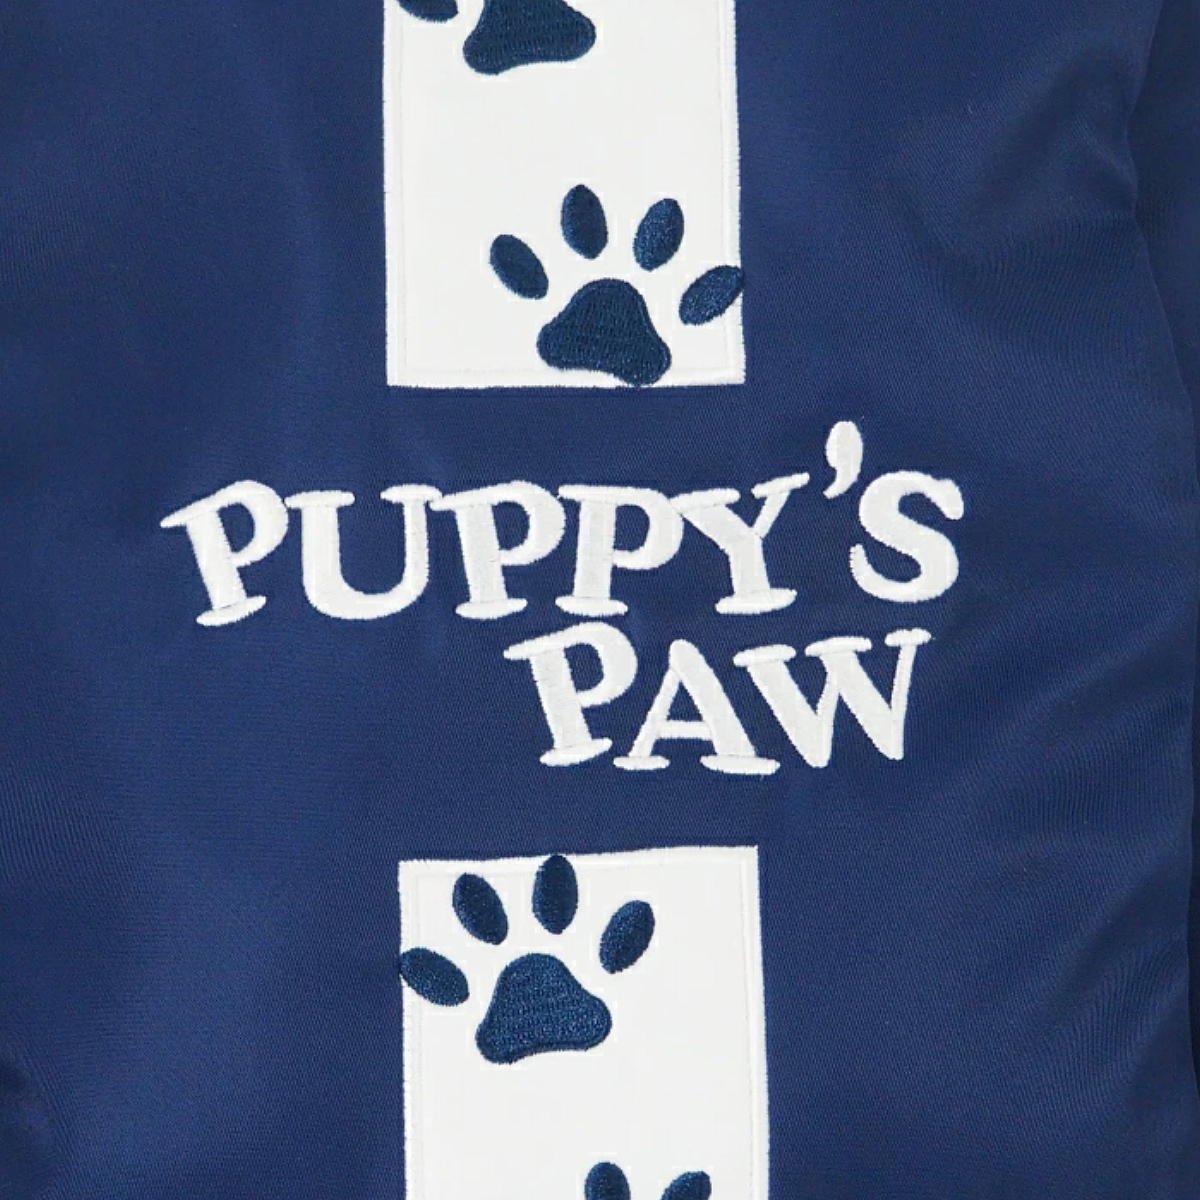 *PUPPY*S PAW. dog. pad PPSC-01 shoes K'S ( red )* free shipping * shoes bag *